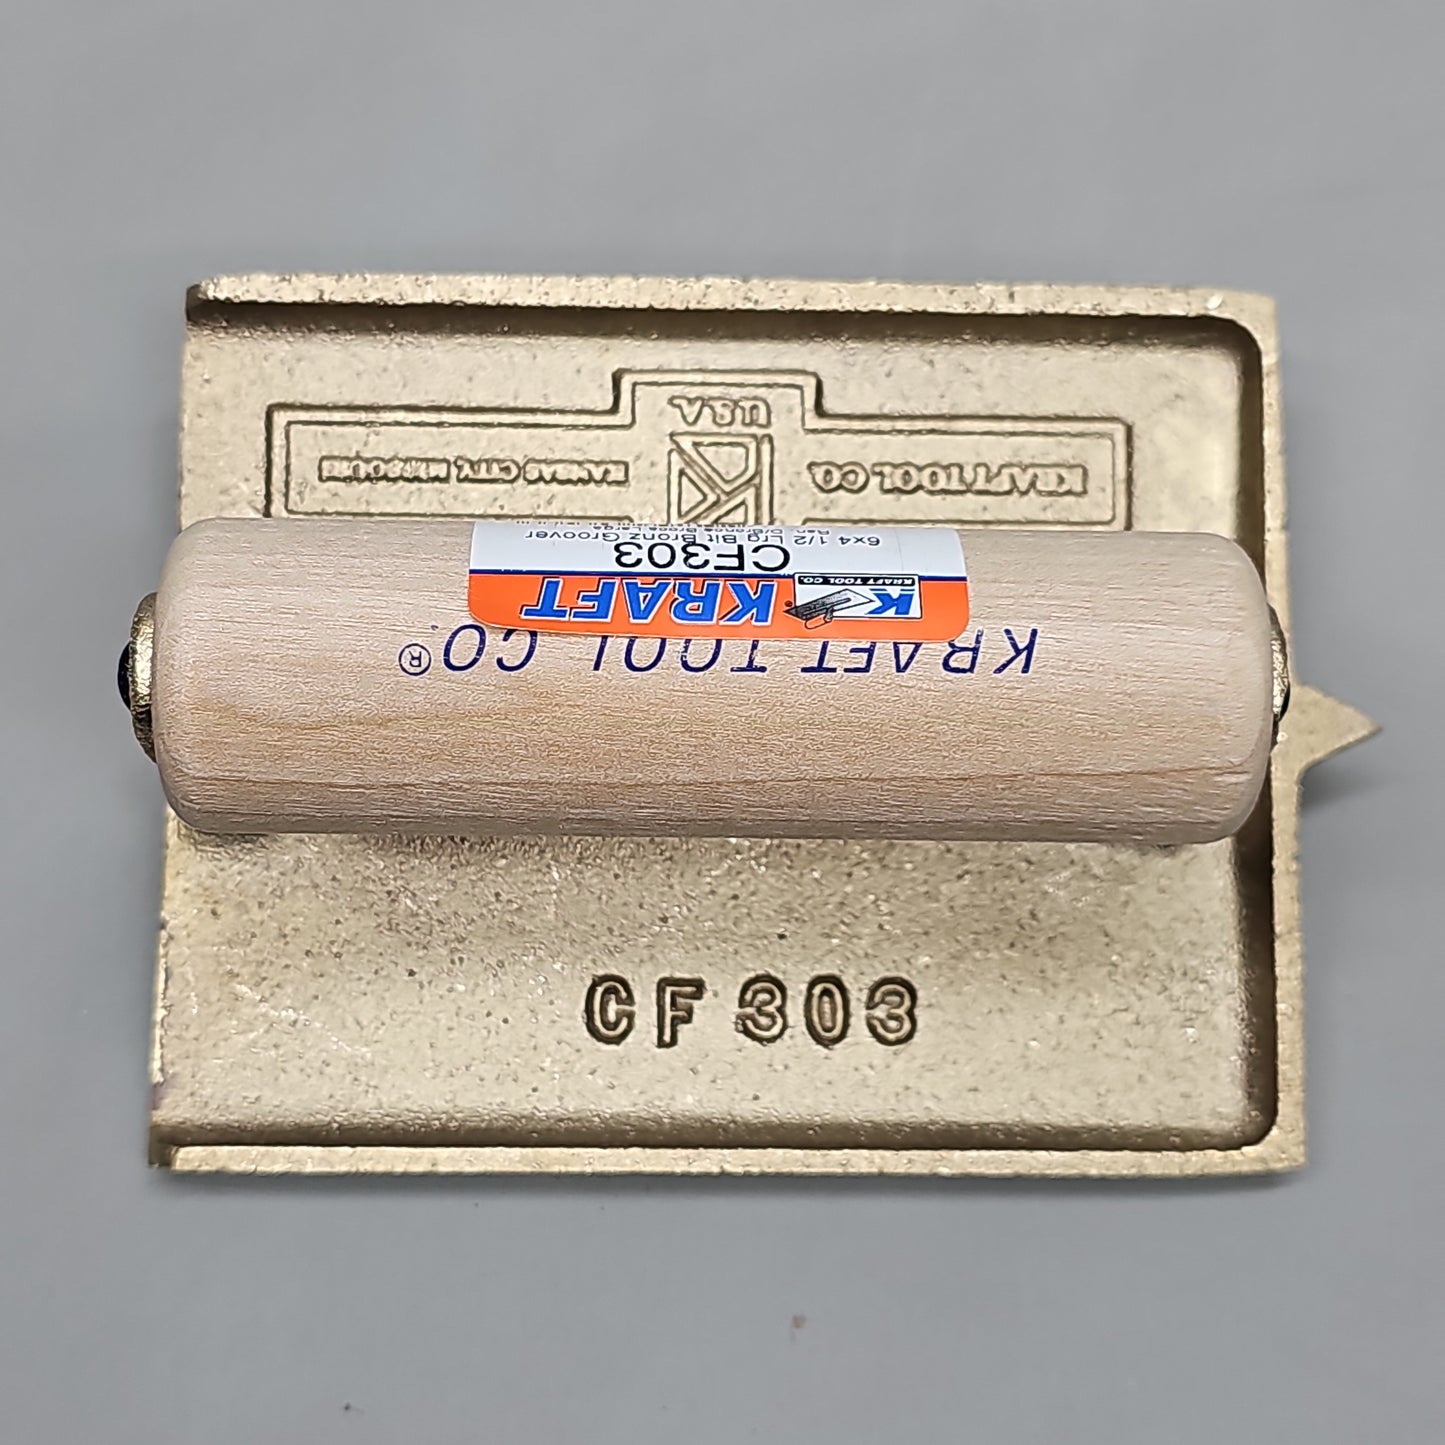 KRAFT TOOL CO Large Bit Bronze Groover with Wood Handle 6" x 4-1/2" 1/4"R 1/2"D CF303 (New)